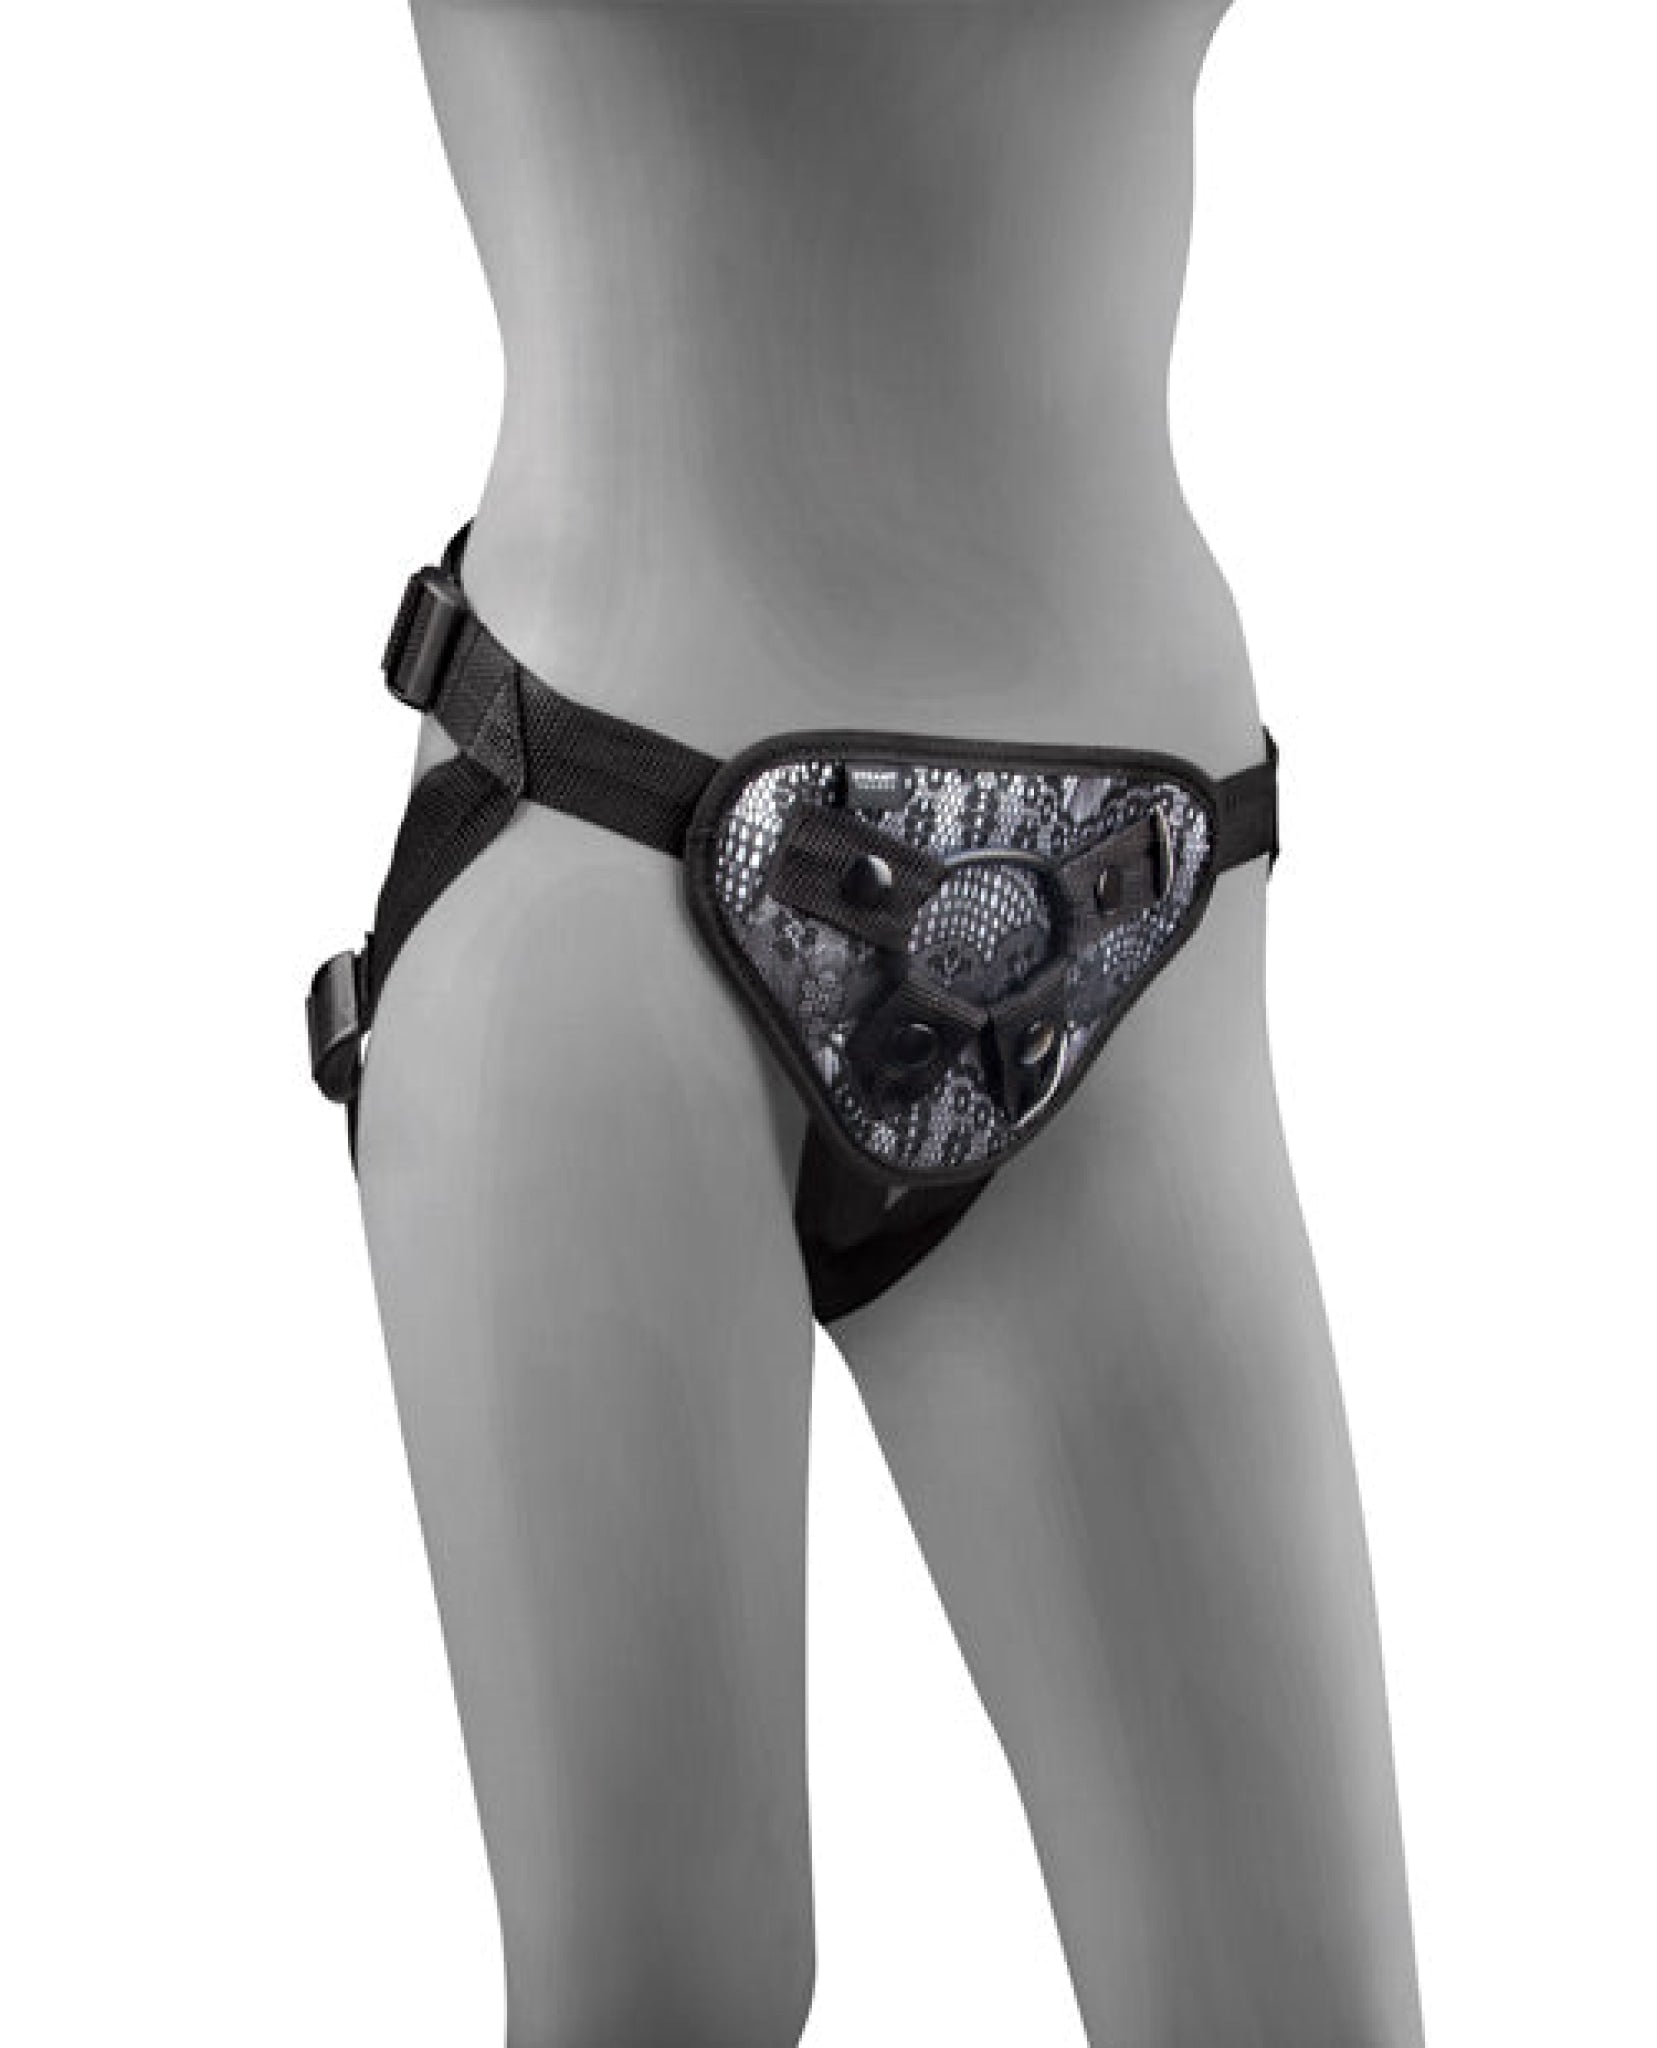 Steamy Shades Classic Harness - Black-white Steamy